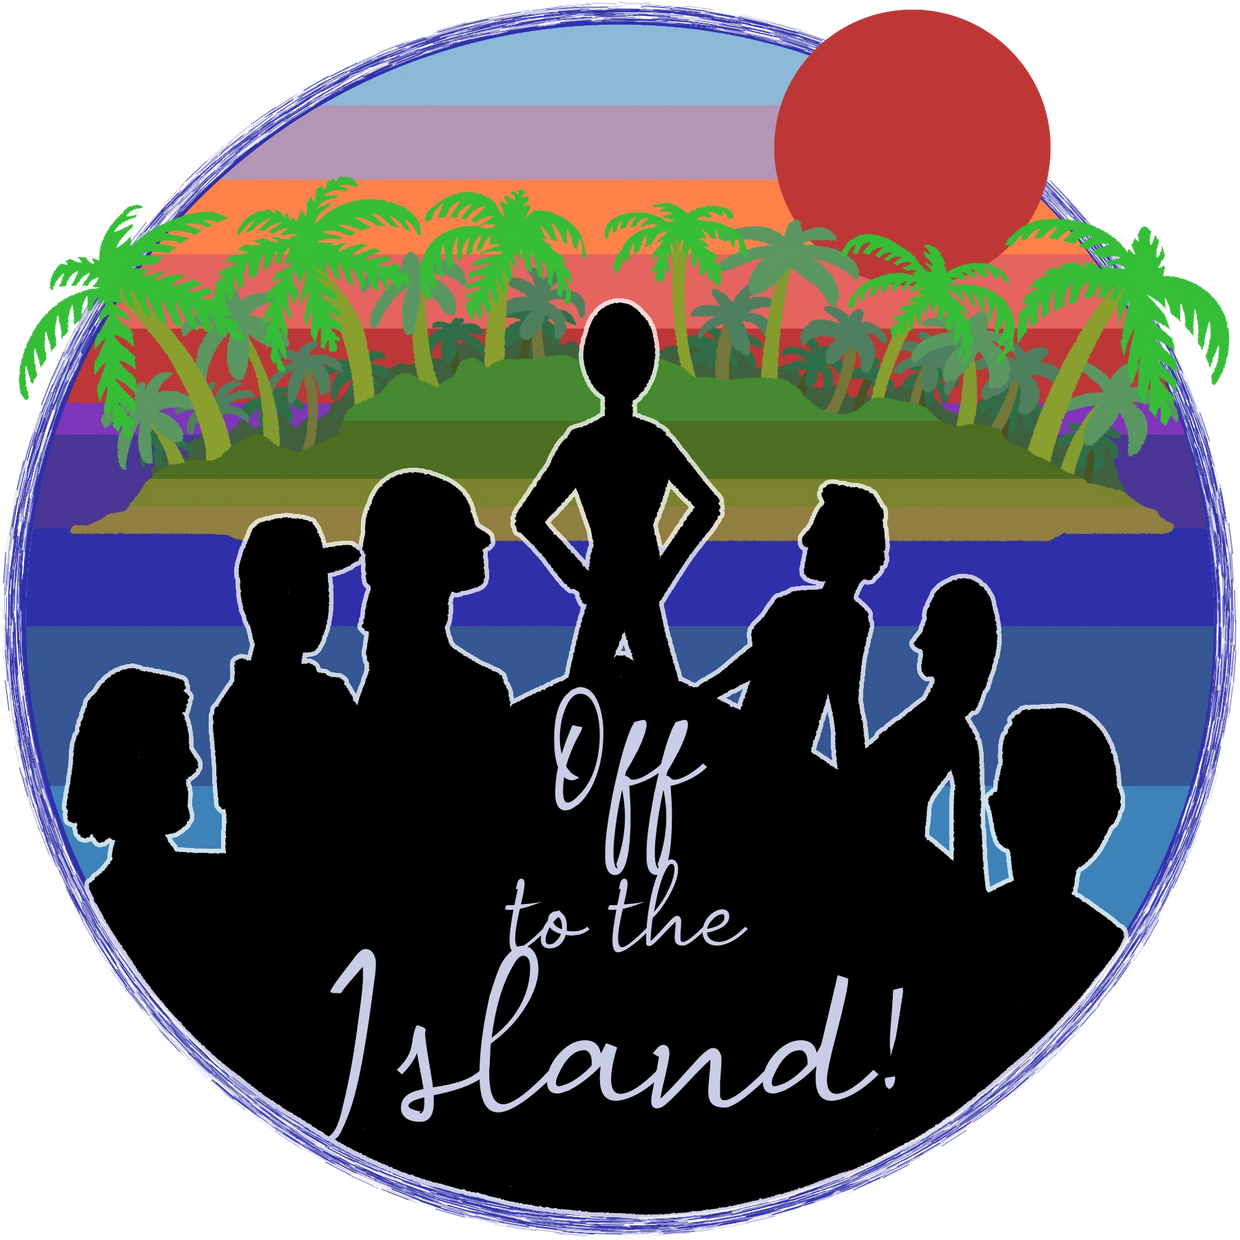 Off to the Island!, a screenplay by Mike Meier